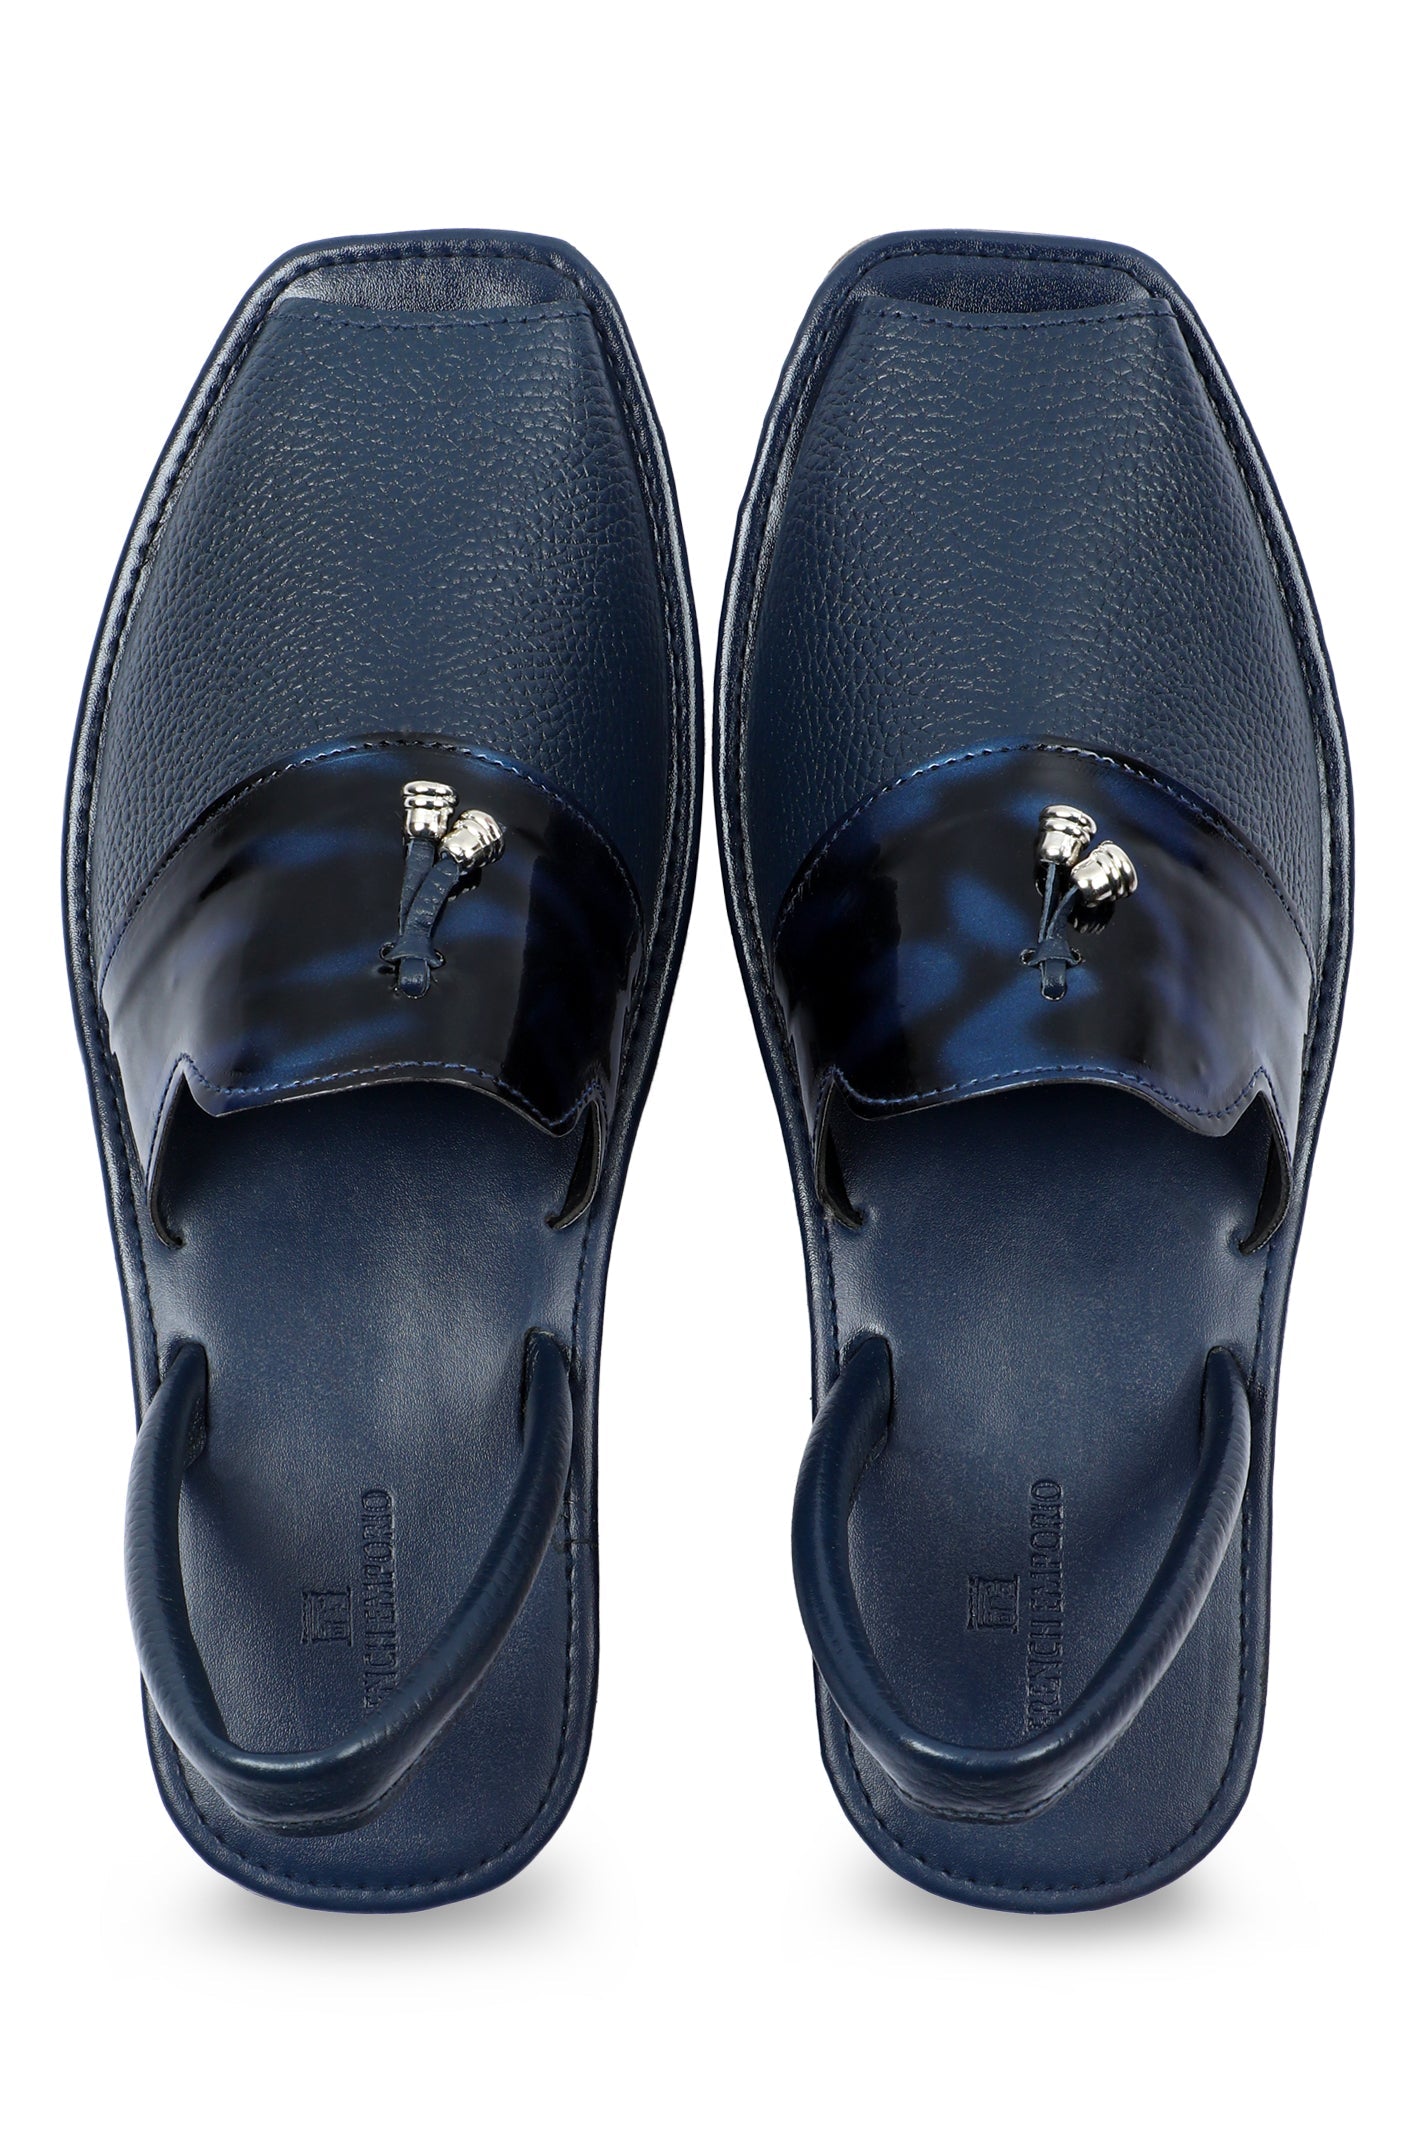 French Emporio Men Sandals SKU: SLD-0033-NAVY - Diners